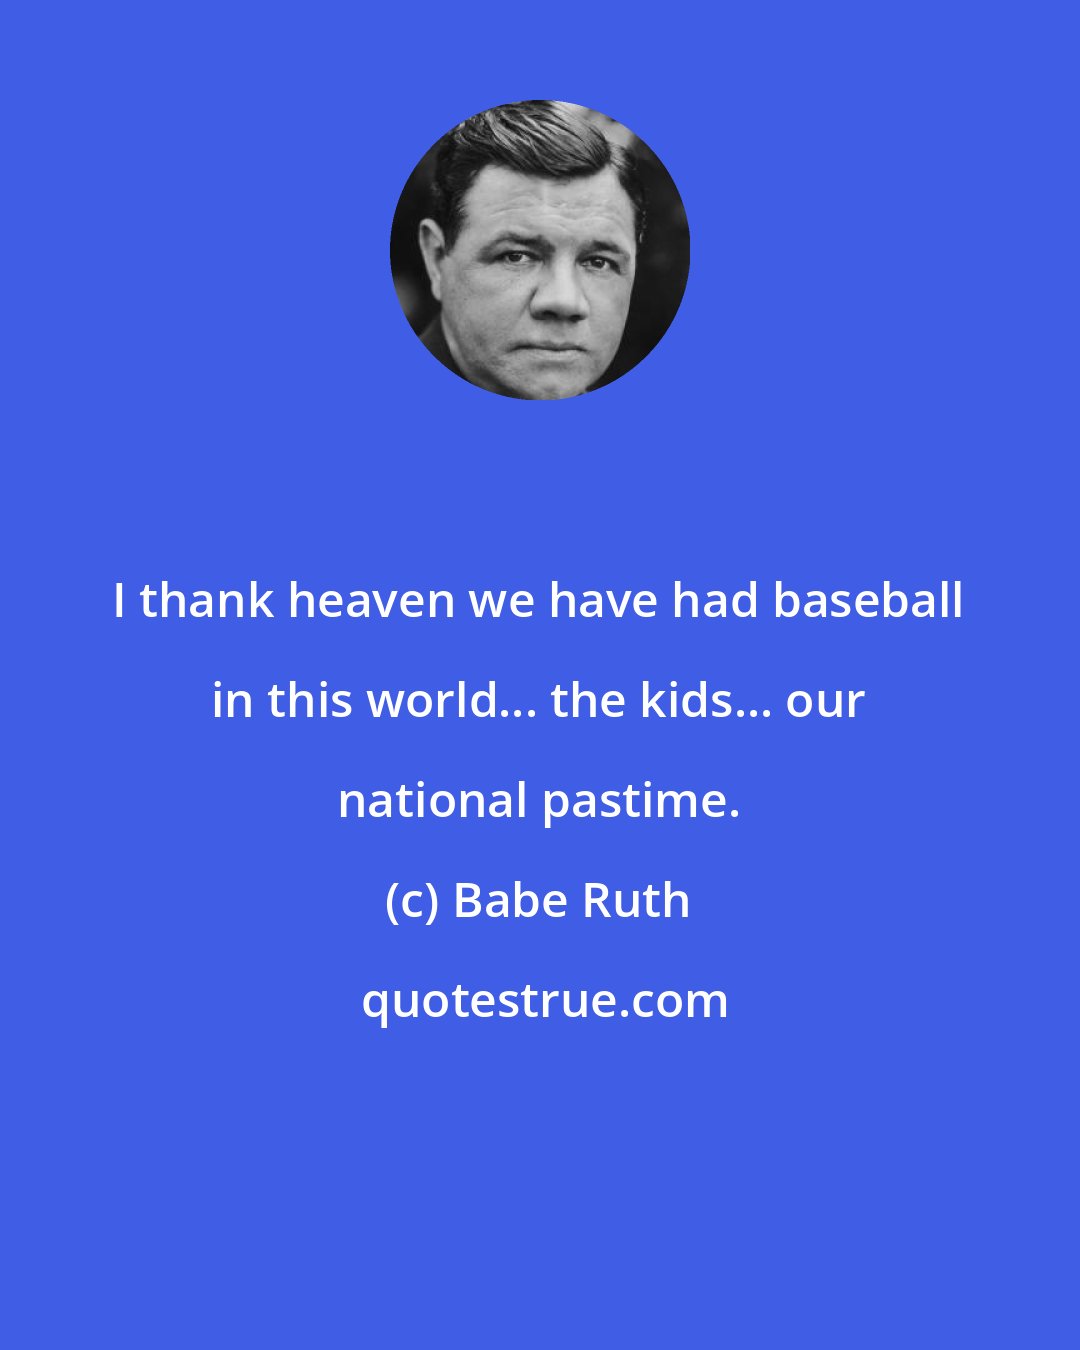 Babe Ruth: I thank heaven we have had baseball in this world... the kids... our national pastime.